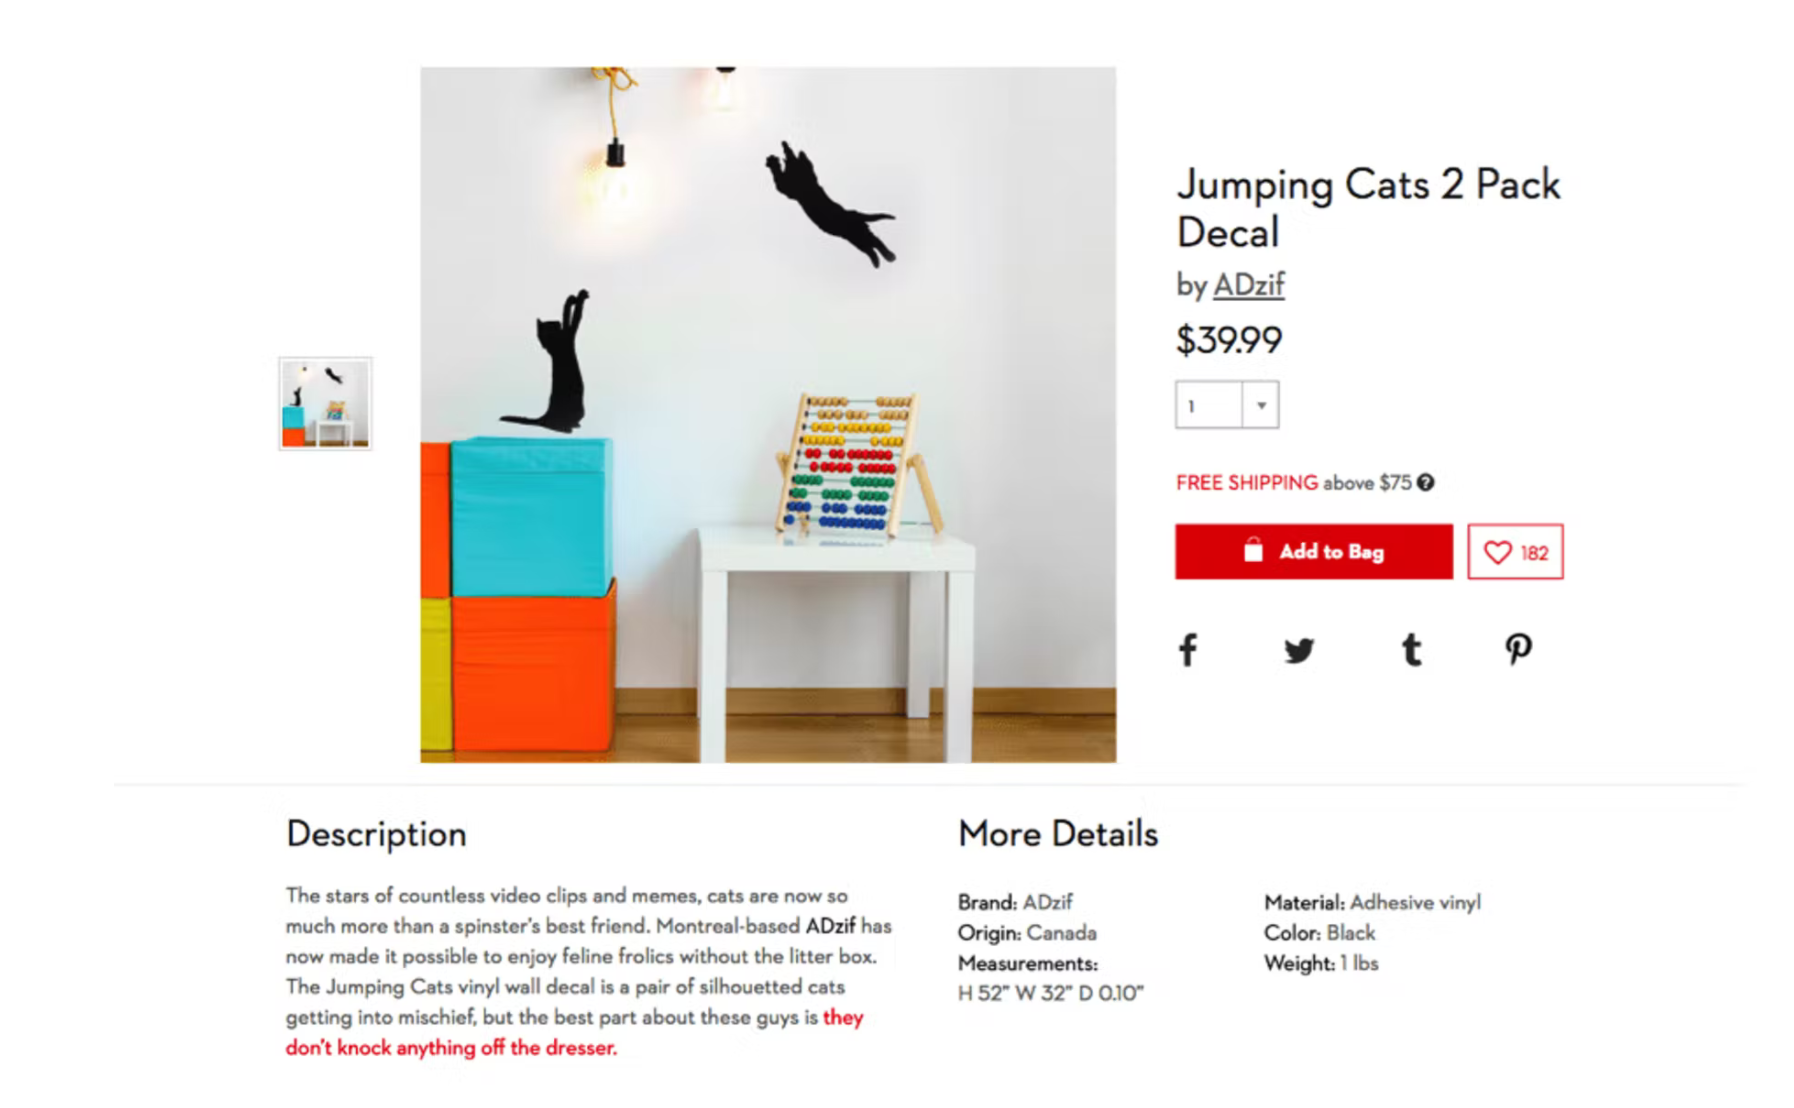 Jumping cats product page